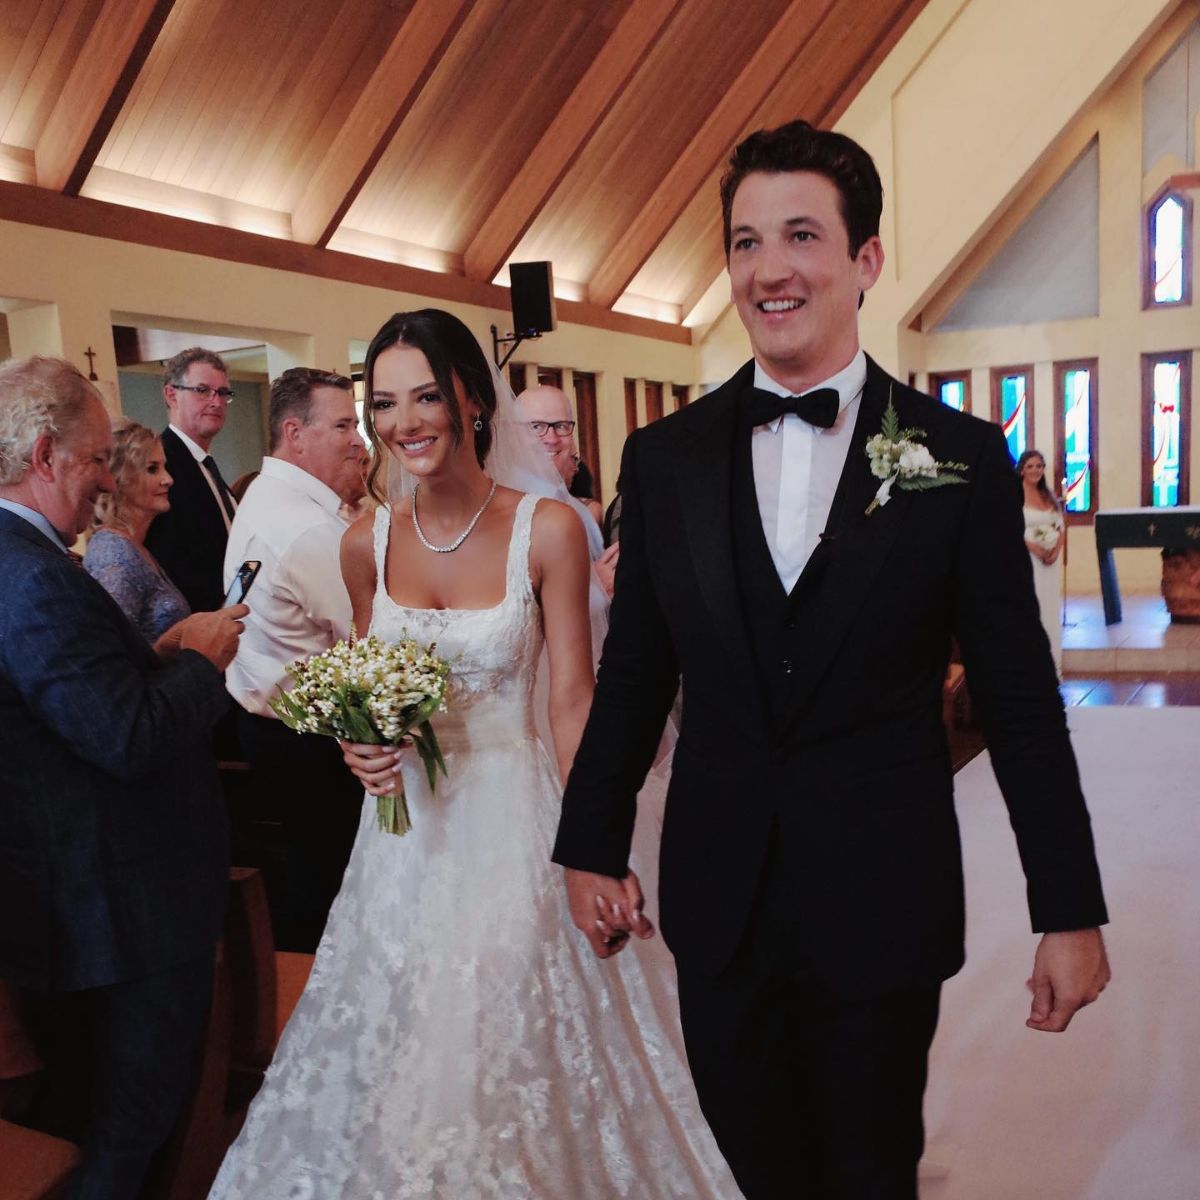 Photo of Keleigh Sperry and her husband, Miles Teller during their wedding ceremony.